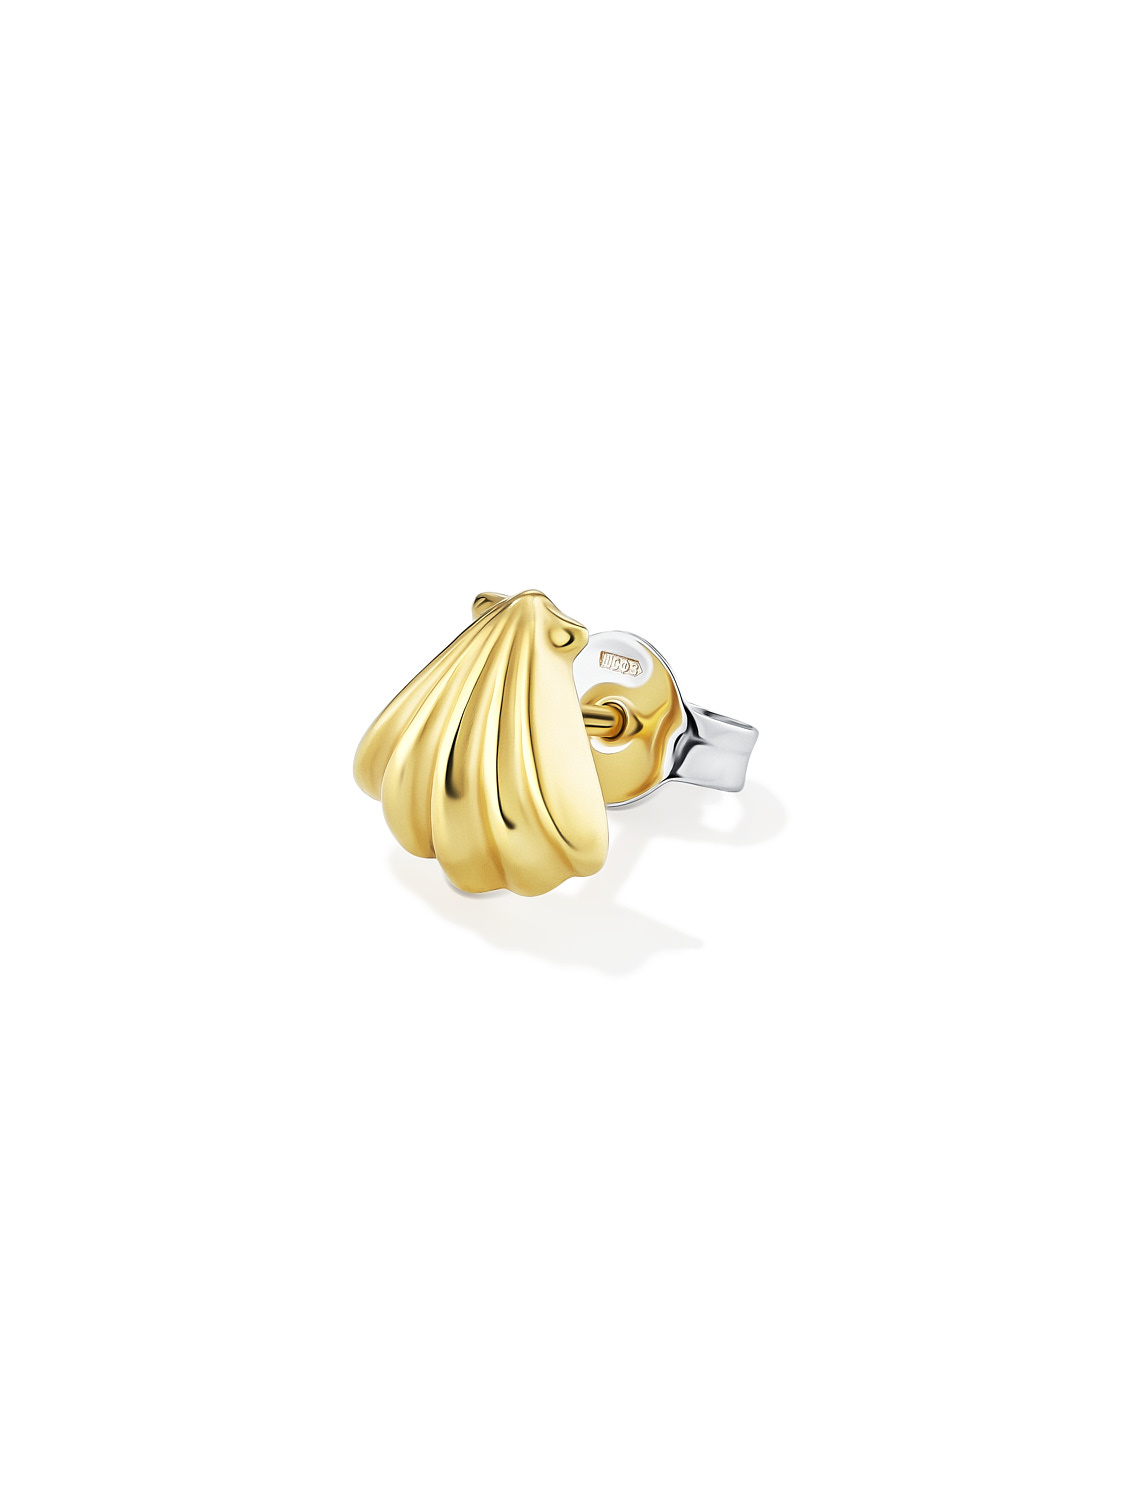 SCALLOP STUD GOLD-PLATED  